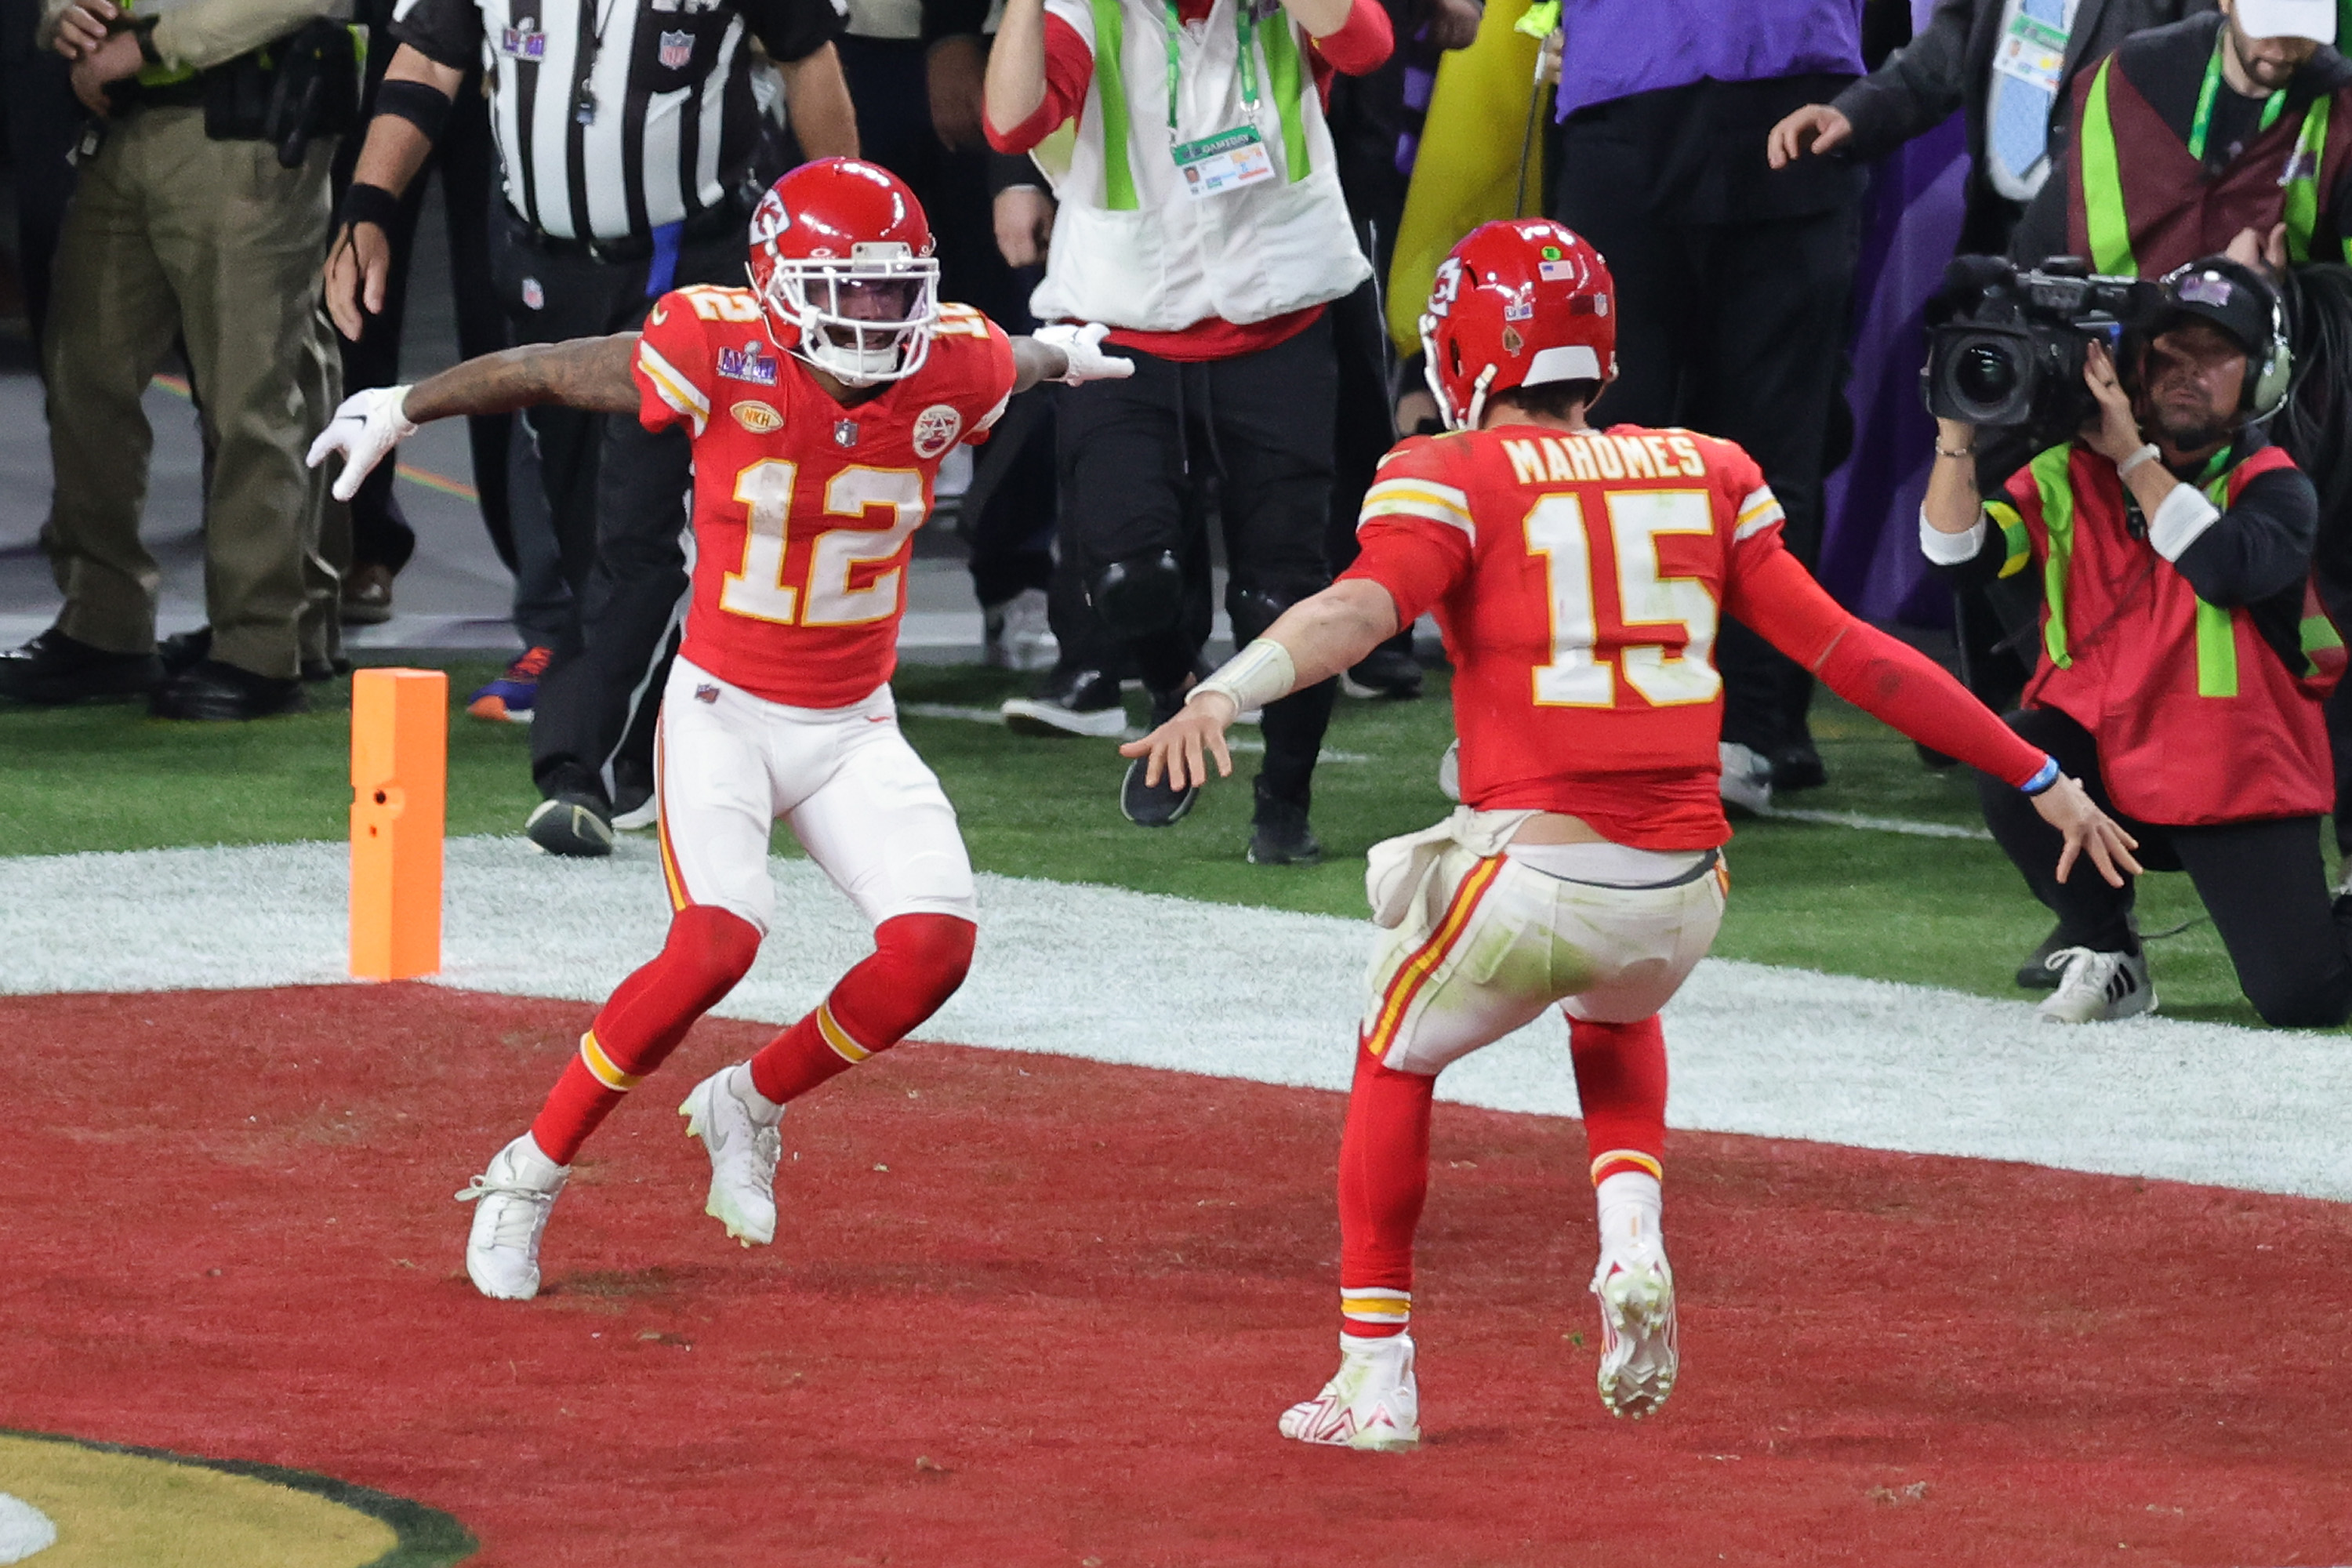 Patrick Mahomes and Mecole Hardman celebrating their game-winning touchdown on the football field during Super Bowl LVIII, with LeSean McCoy nearby.